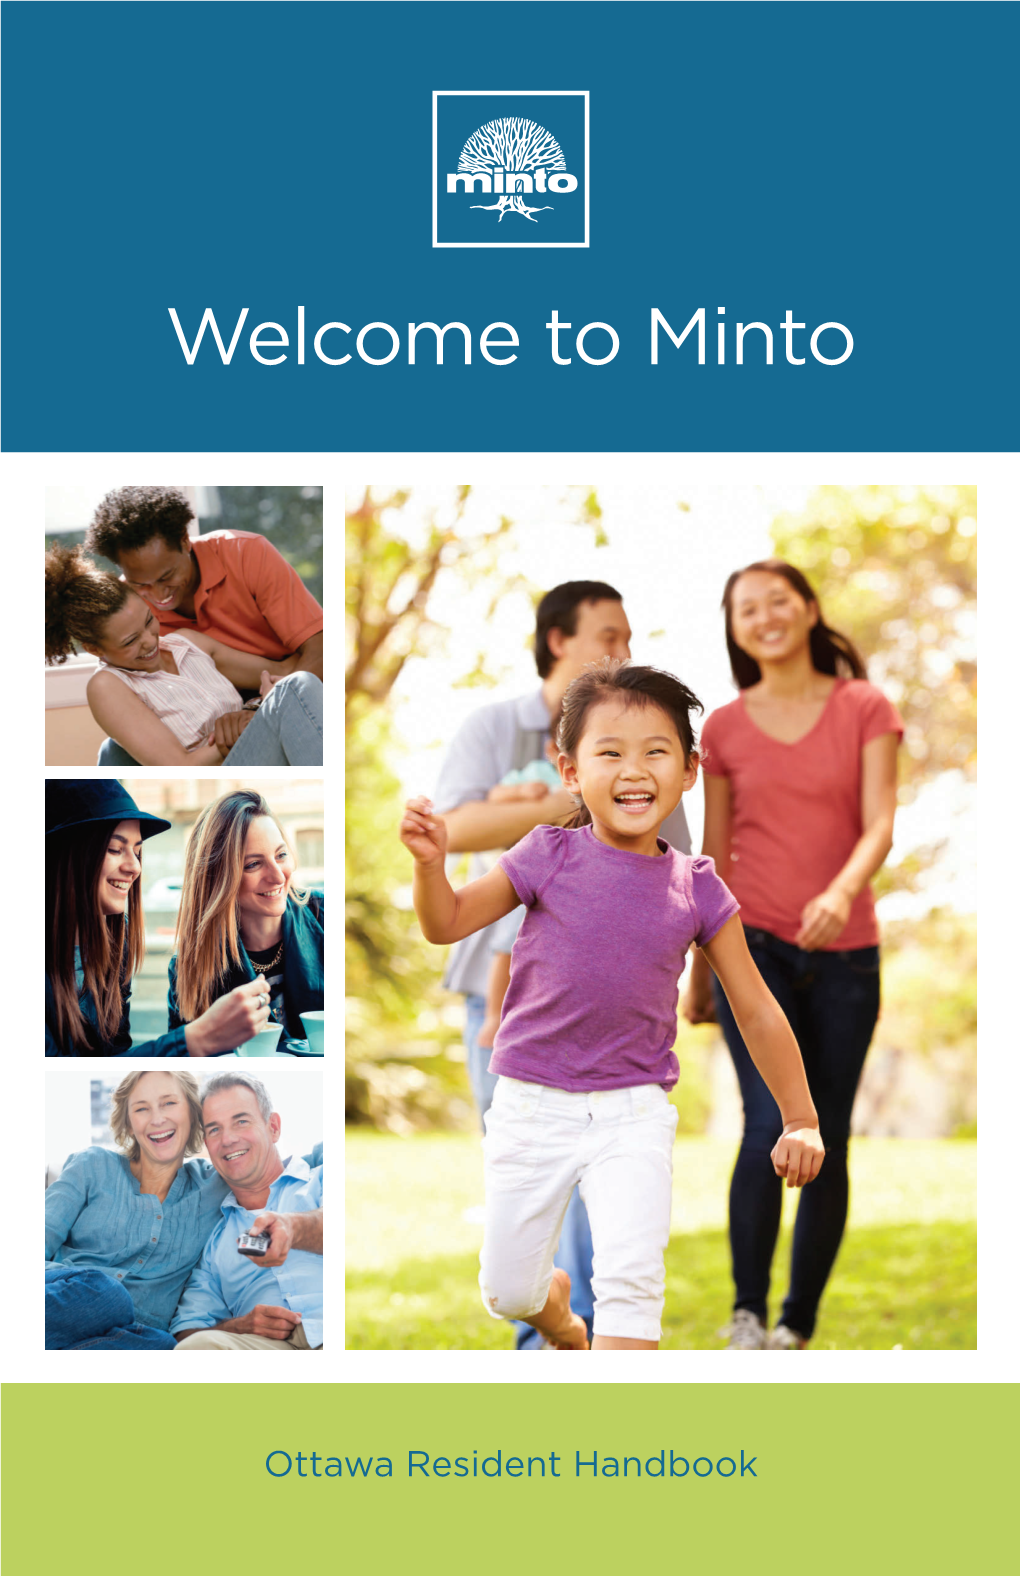 Welcome to Minto